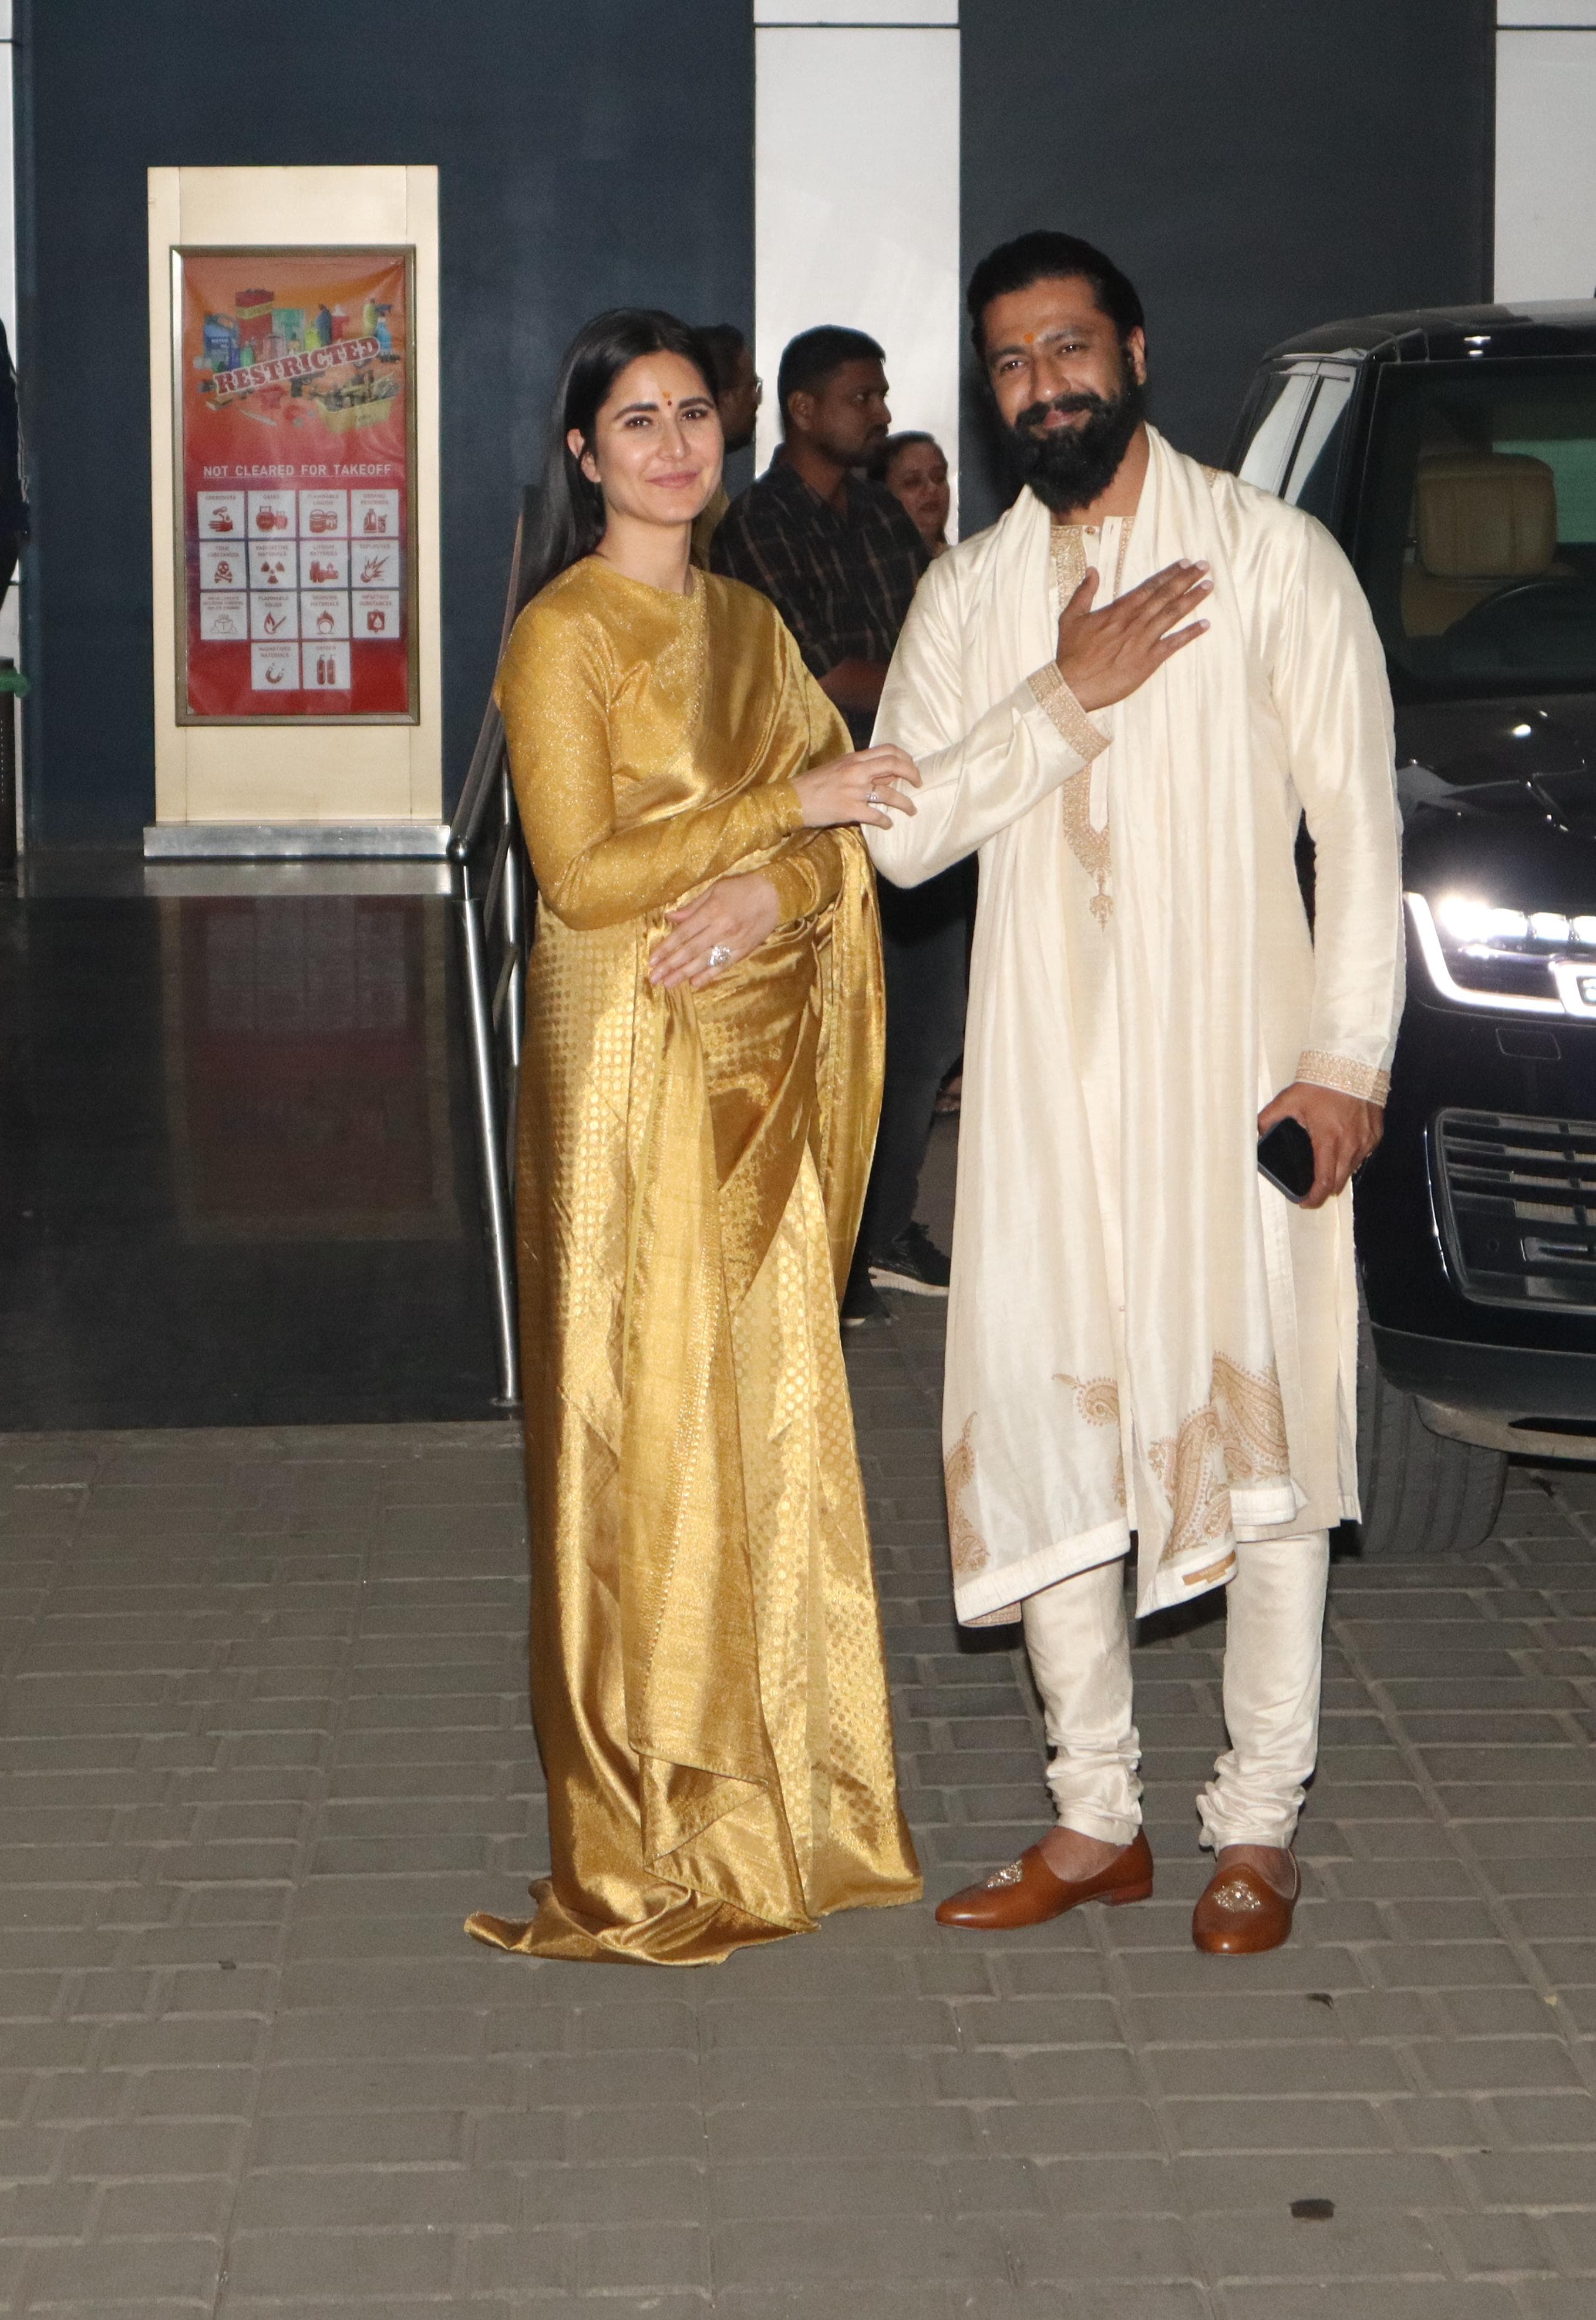 Power couple Vicky Kaushal and Katrina Kaif were also snapped at Kalina airport as they returned to the city